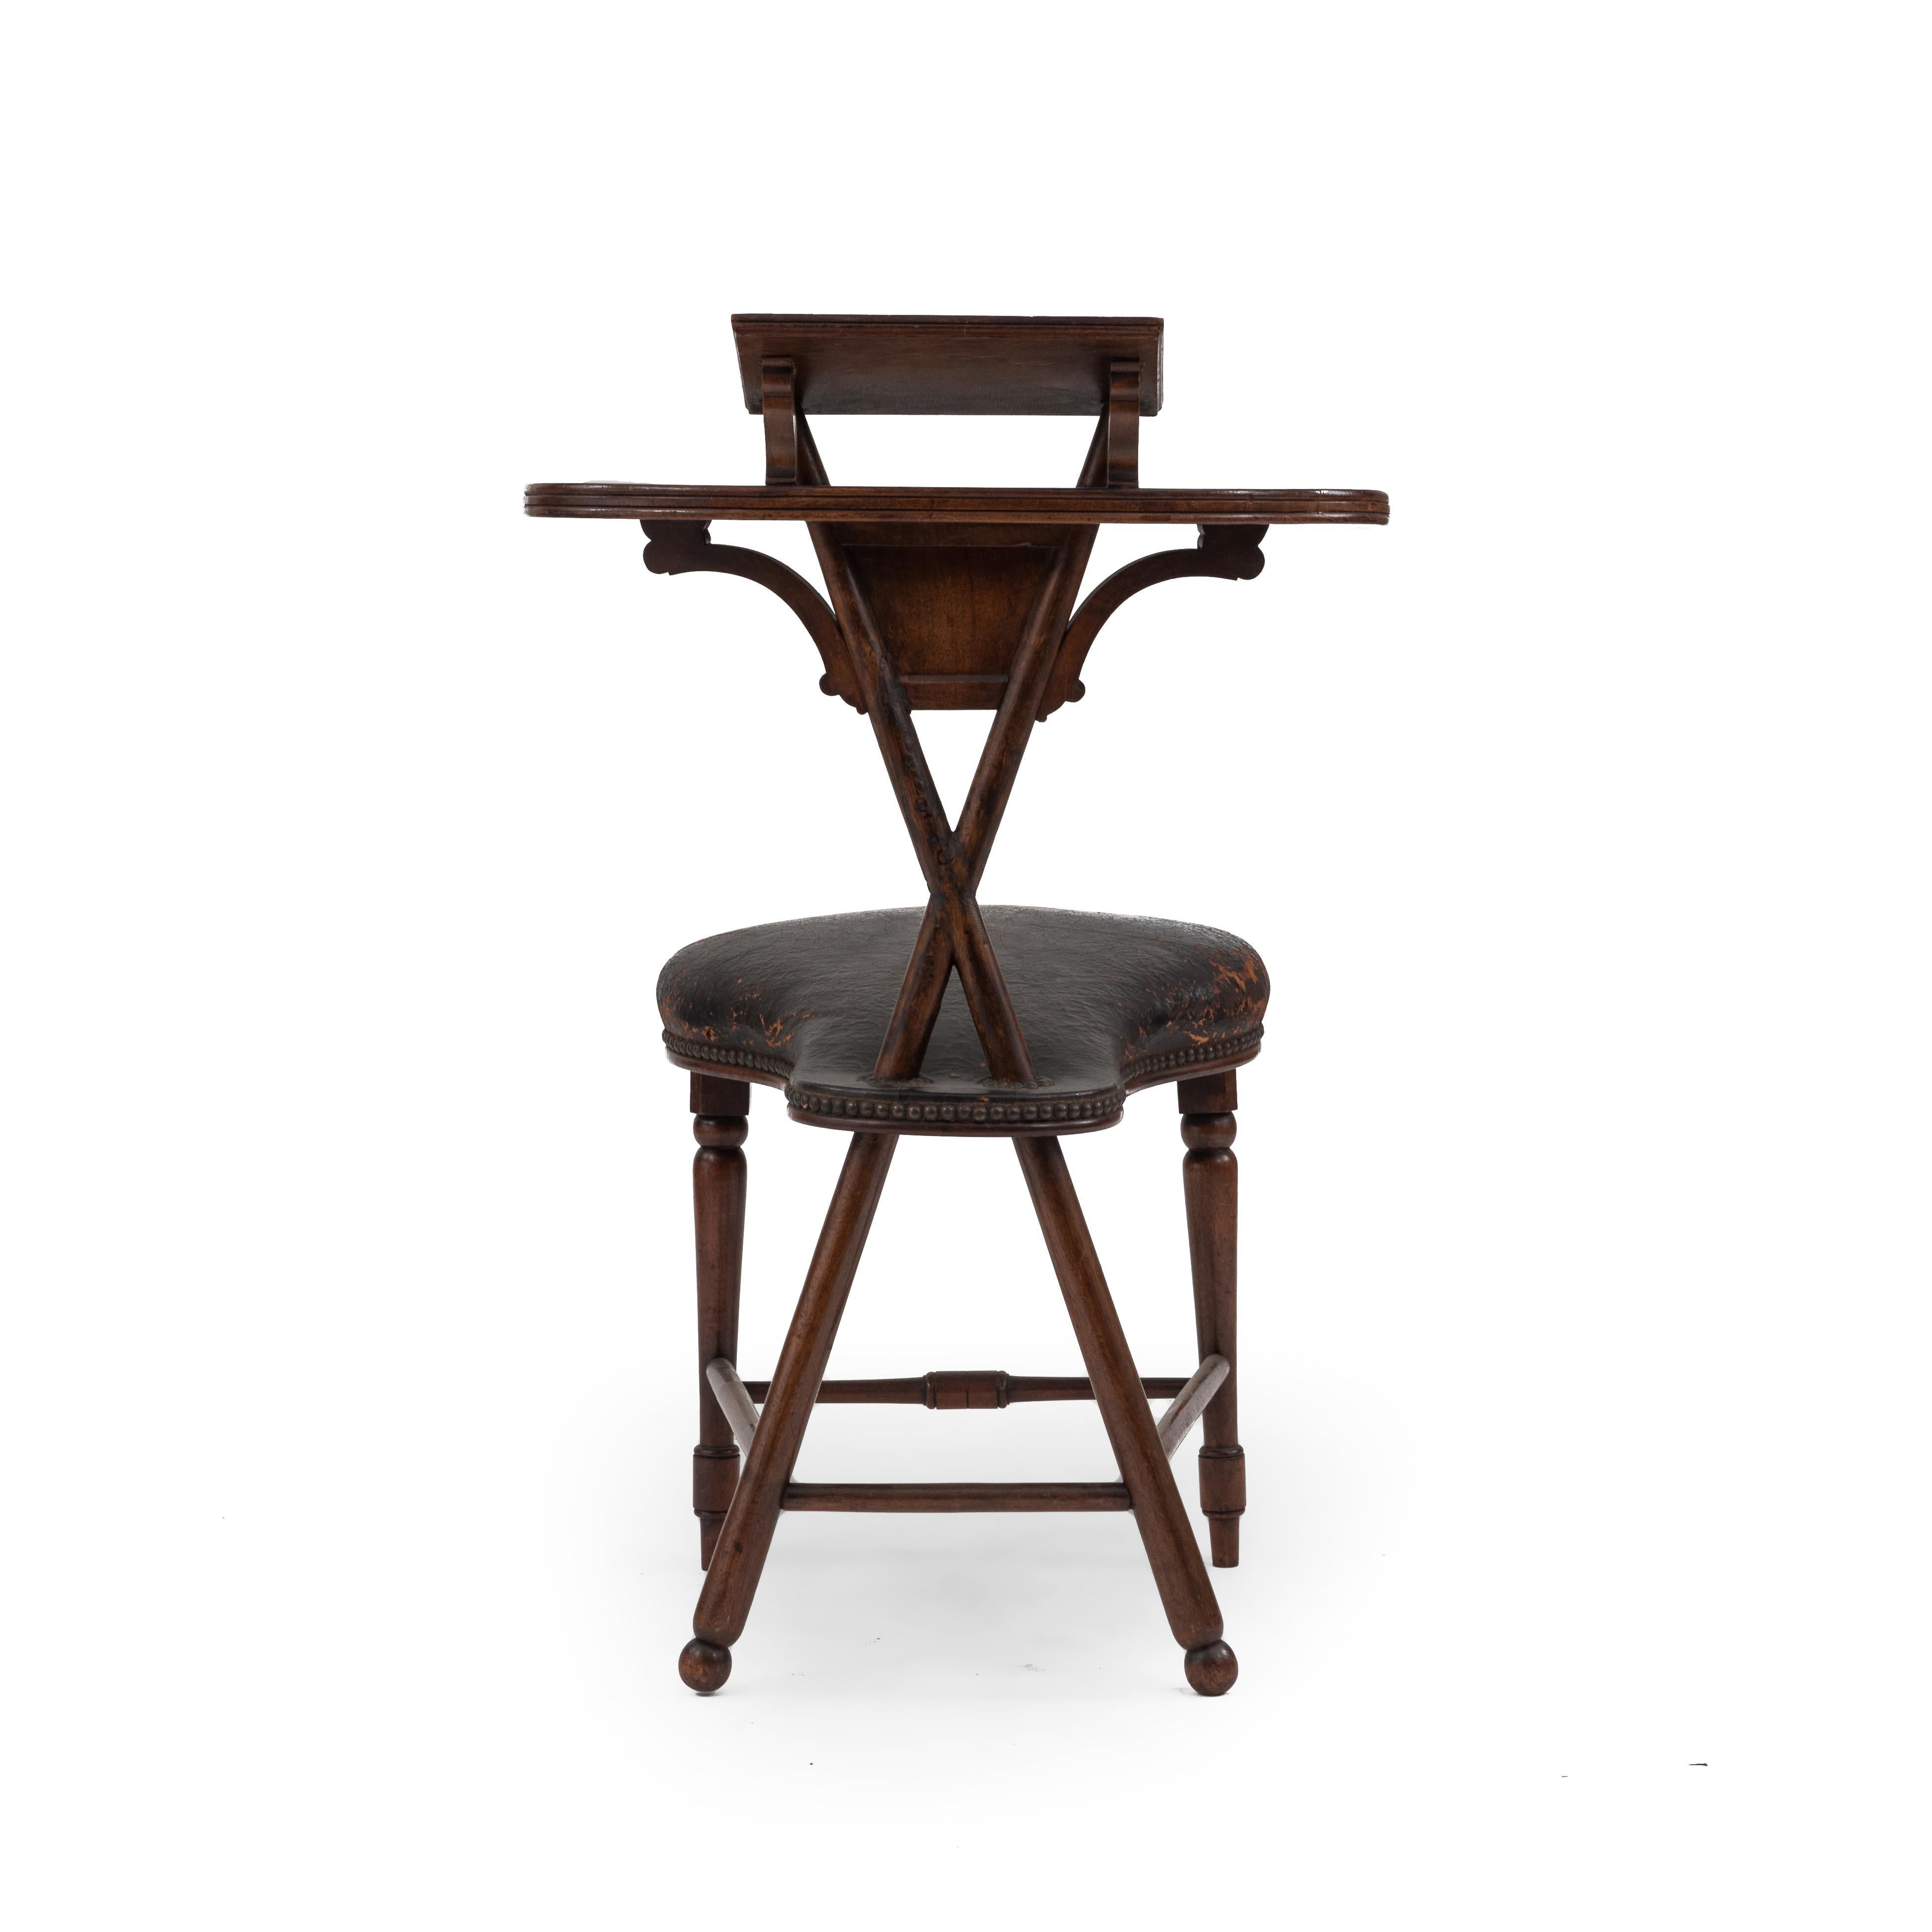 English Georgian style (19th century) Thomas Jefferson walnut reading chair with brown leather seat and open cross design back with book shelf. A rare mid-19th century reading chair. The owner sat astride the saddle seat facing the back of the chair